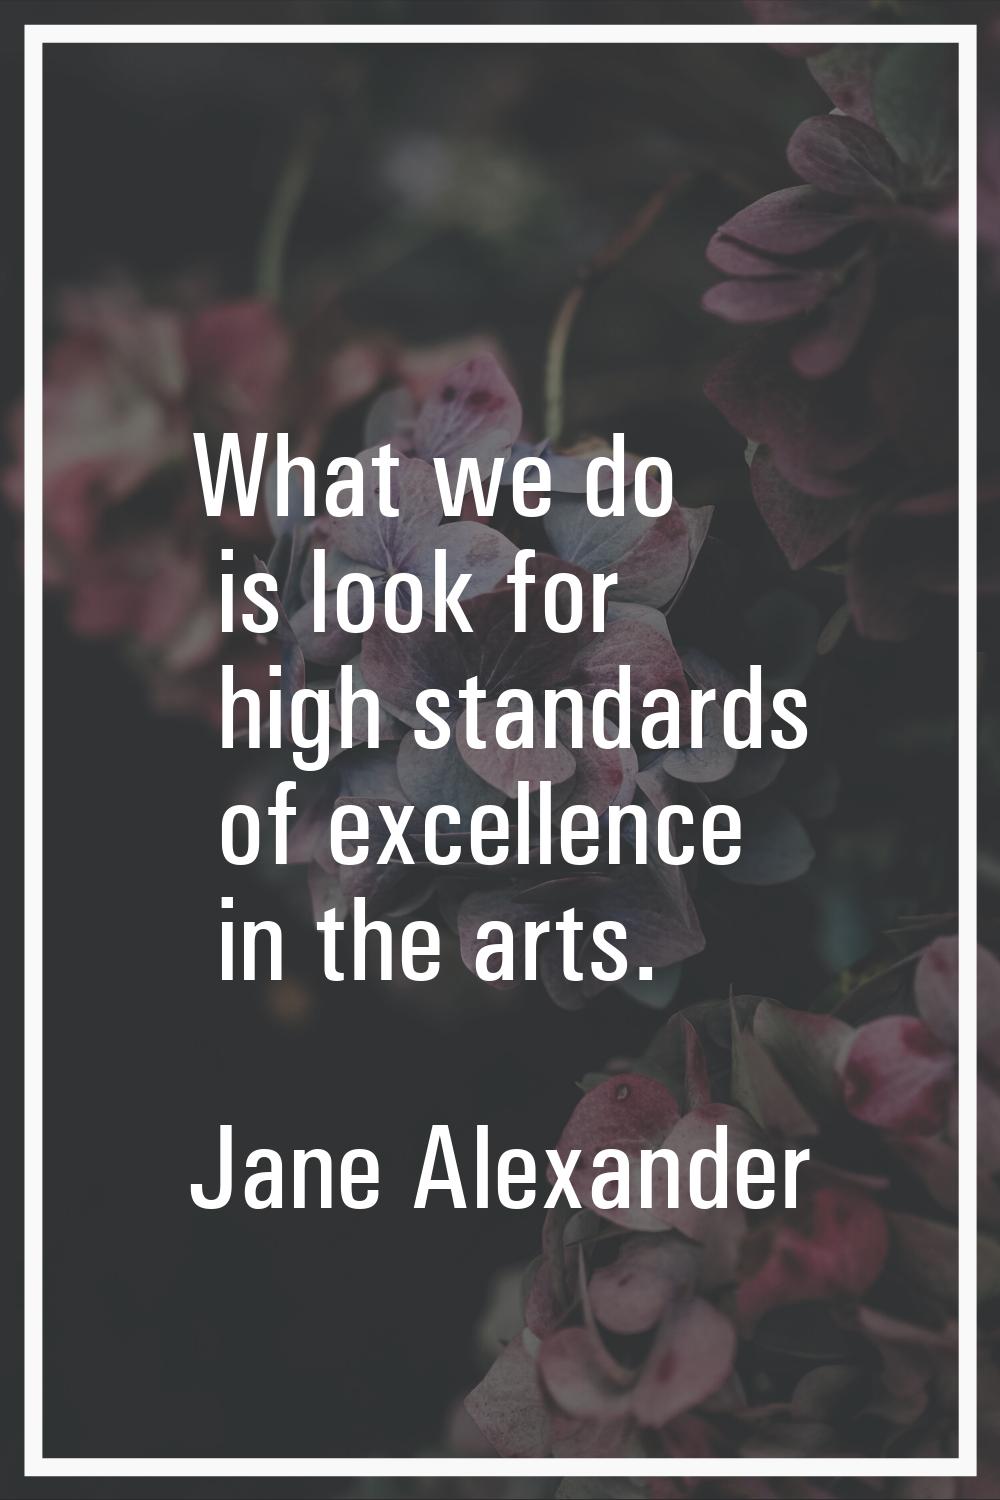 What we do is look for high standards of excellence in the arts.